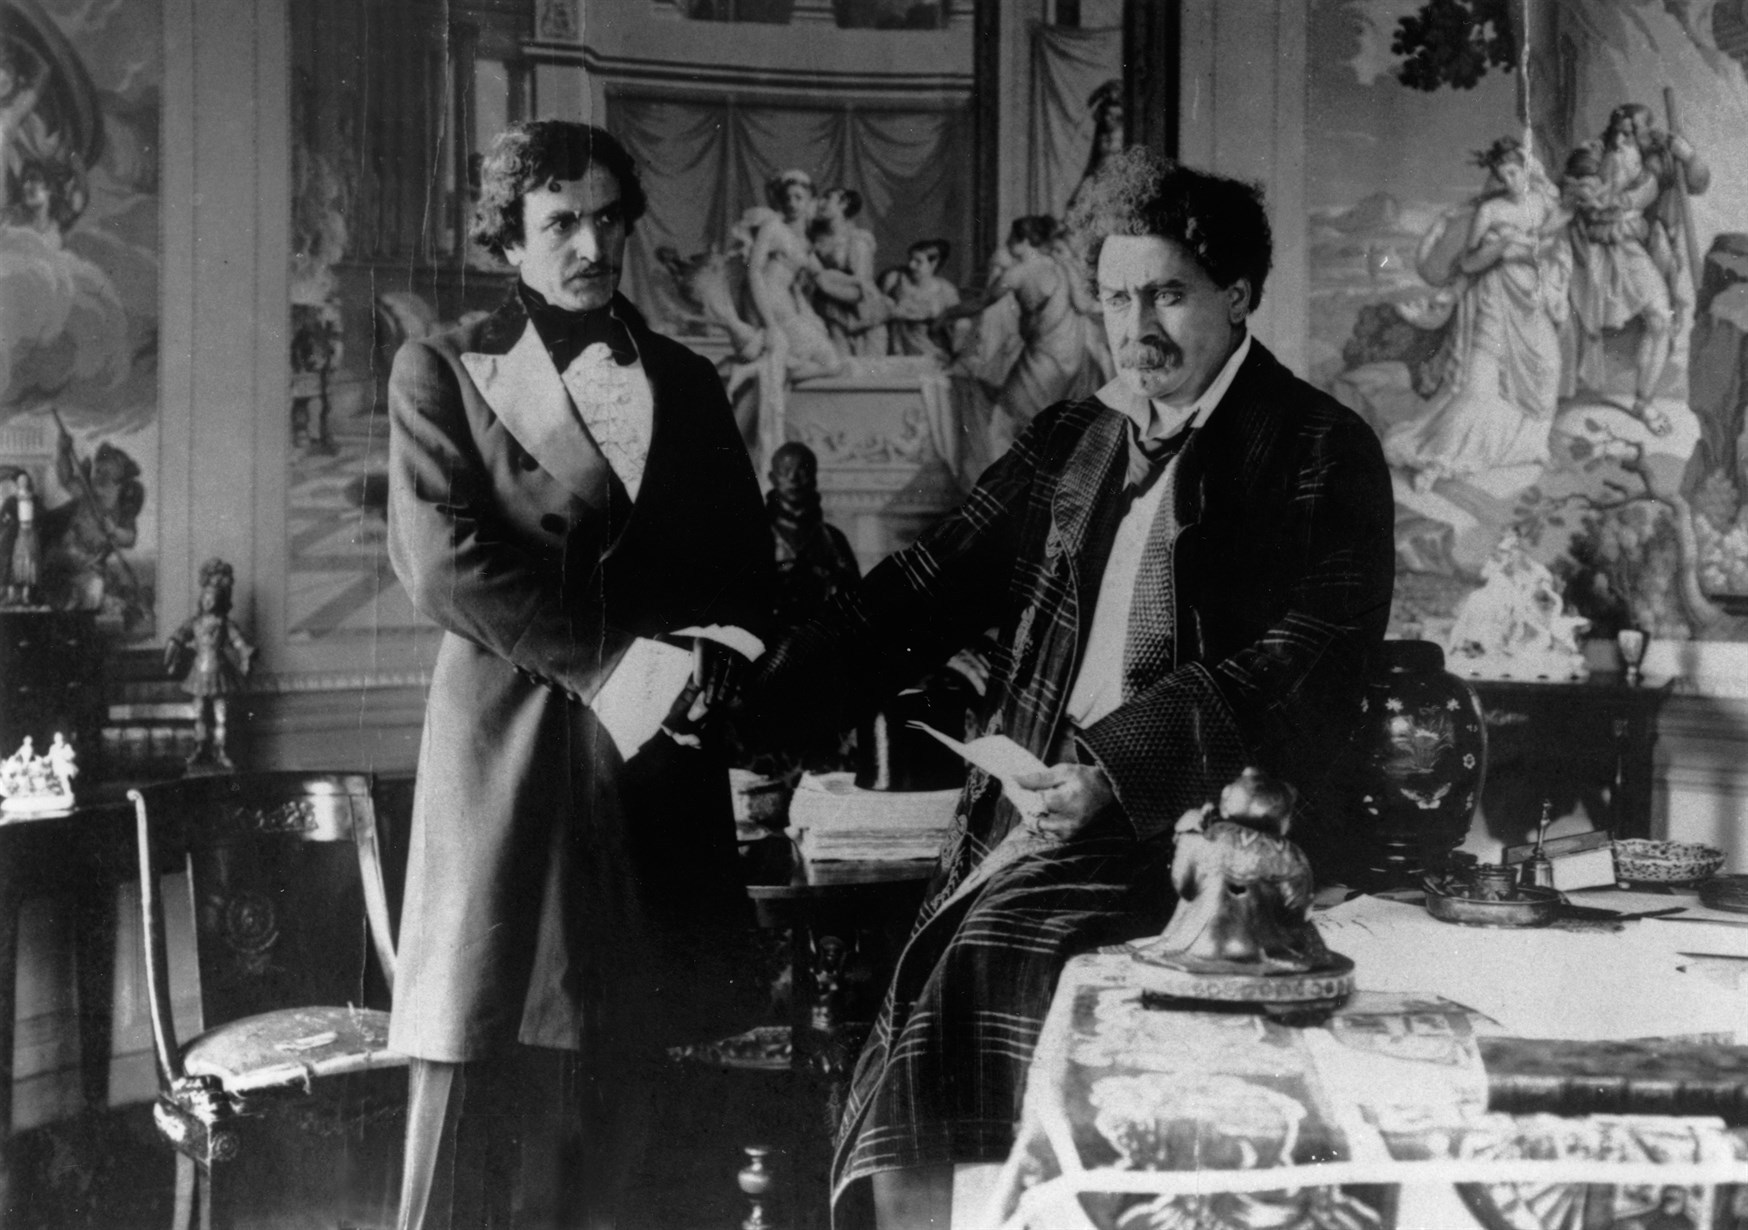 Still of Romuald Joubé and Henry Krauss in Les frères corses (1917)